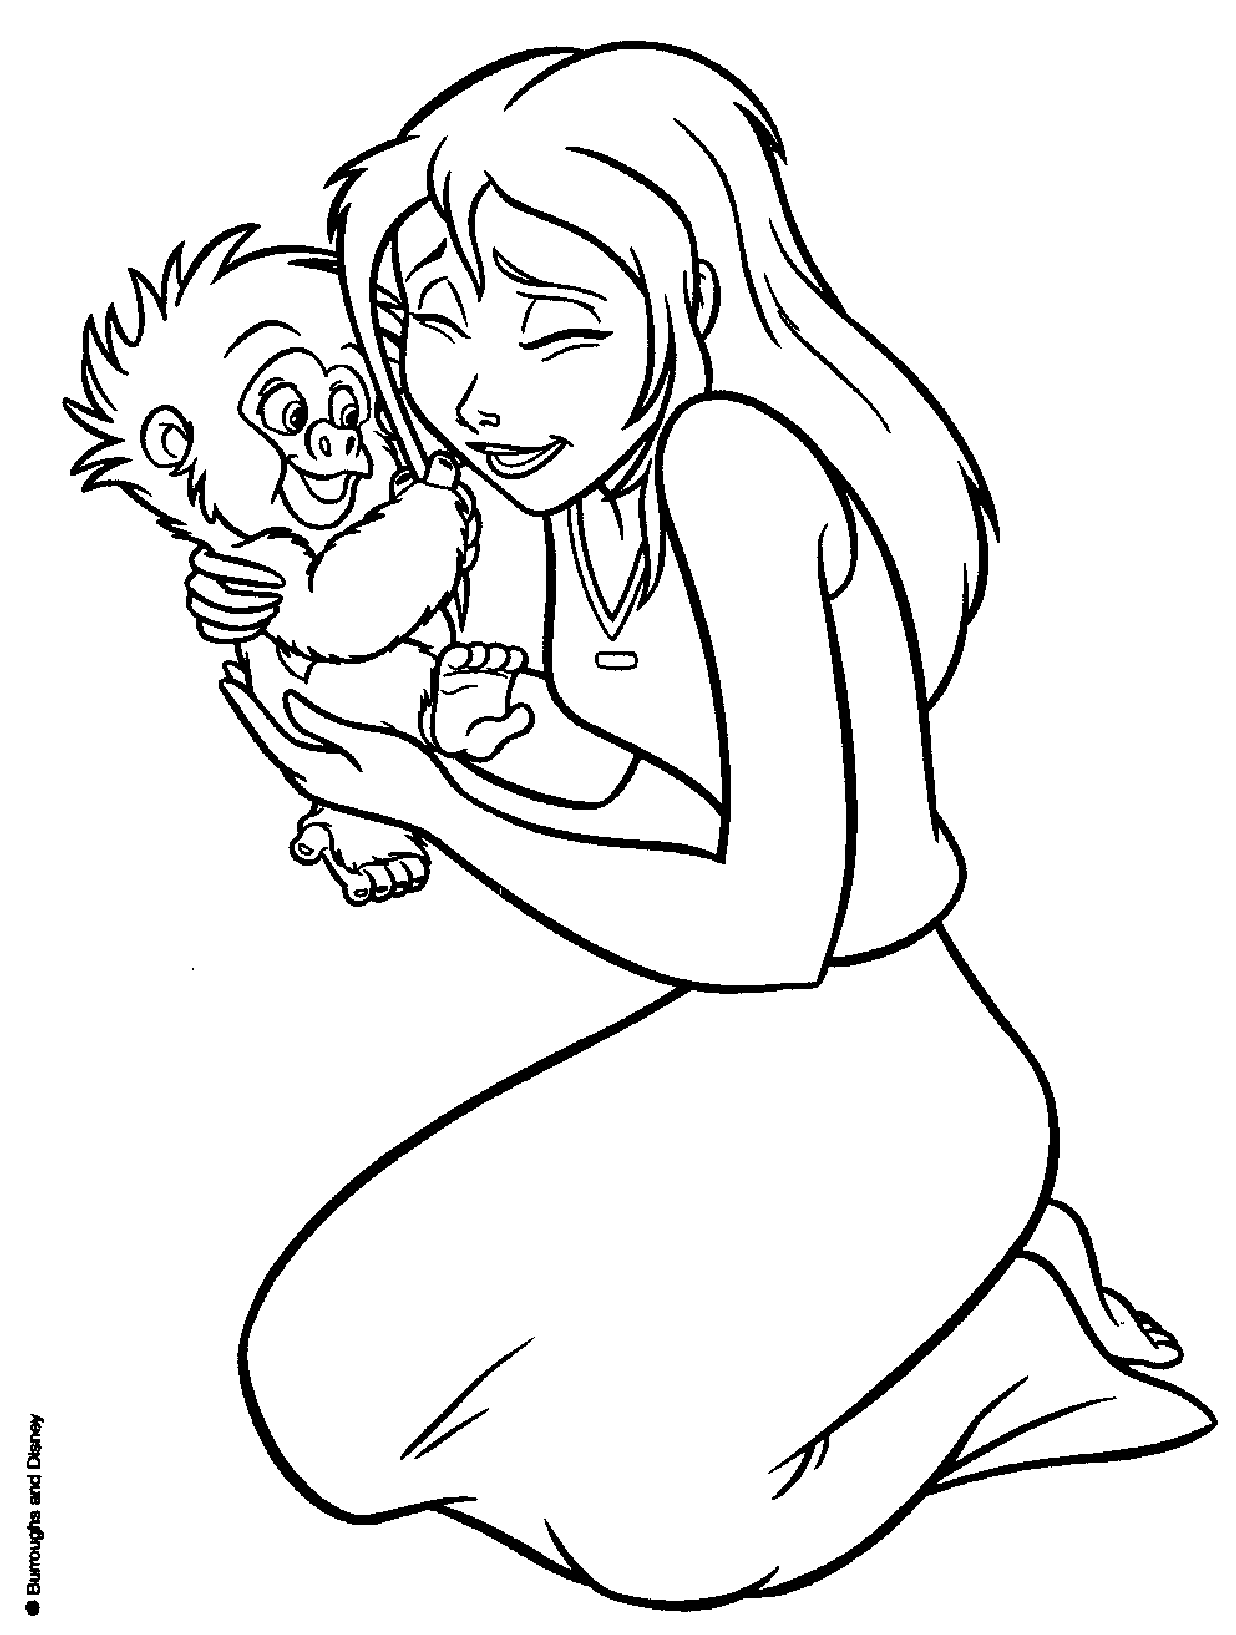 Tarzan And Jane Coloring Pages